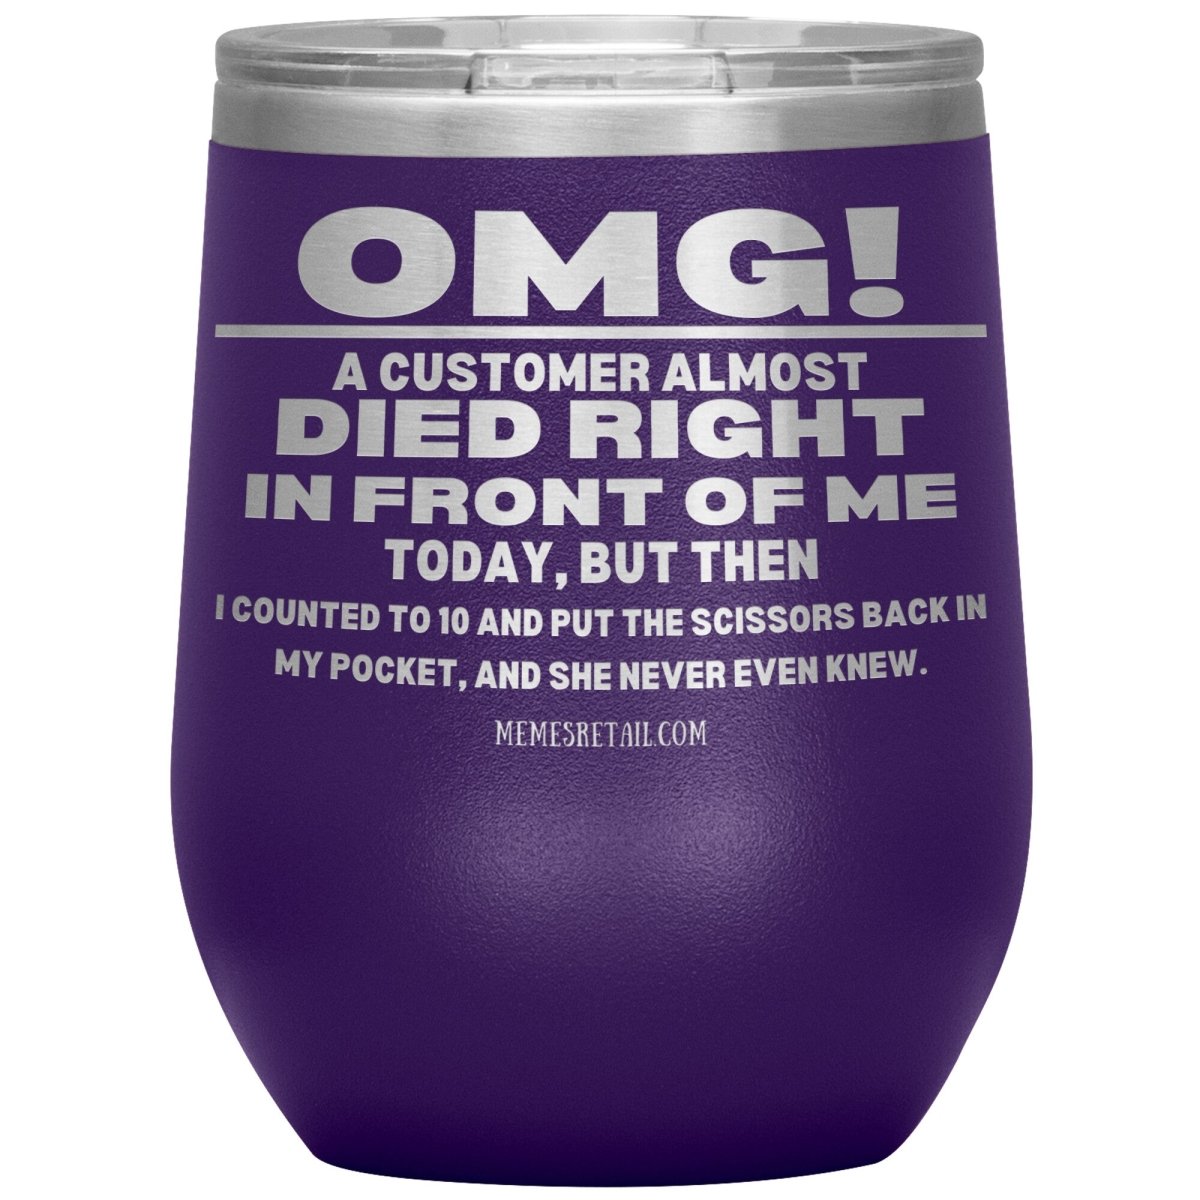 OMG! A Customer Almost Died Right In Front Of Me Tumbler, 12oz Wine Insulated Tumbler / Purple - MemesRetail.com